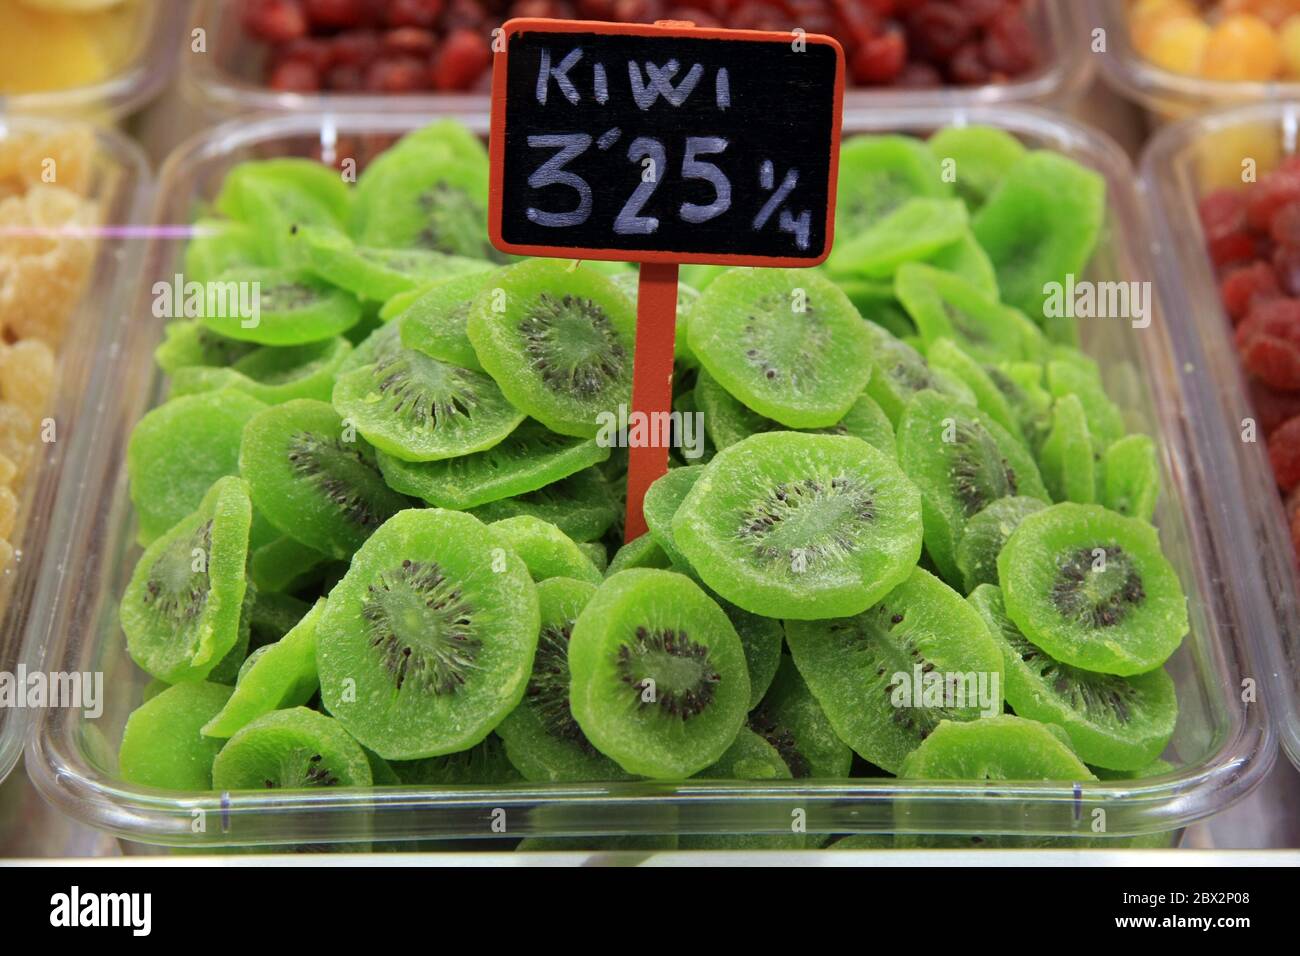 Dried kiwi in plastic container close up on a market stall in Europe Stock Photo